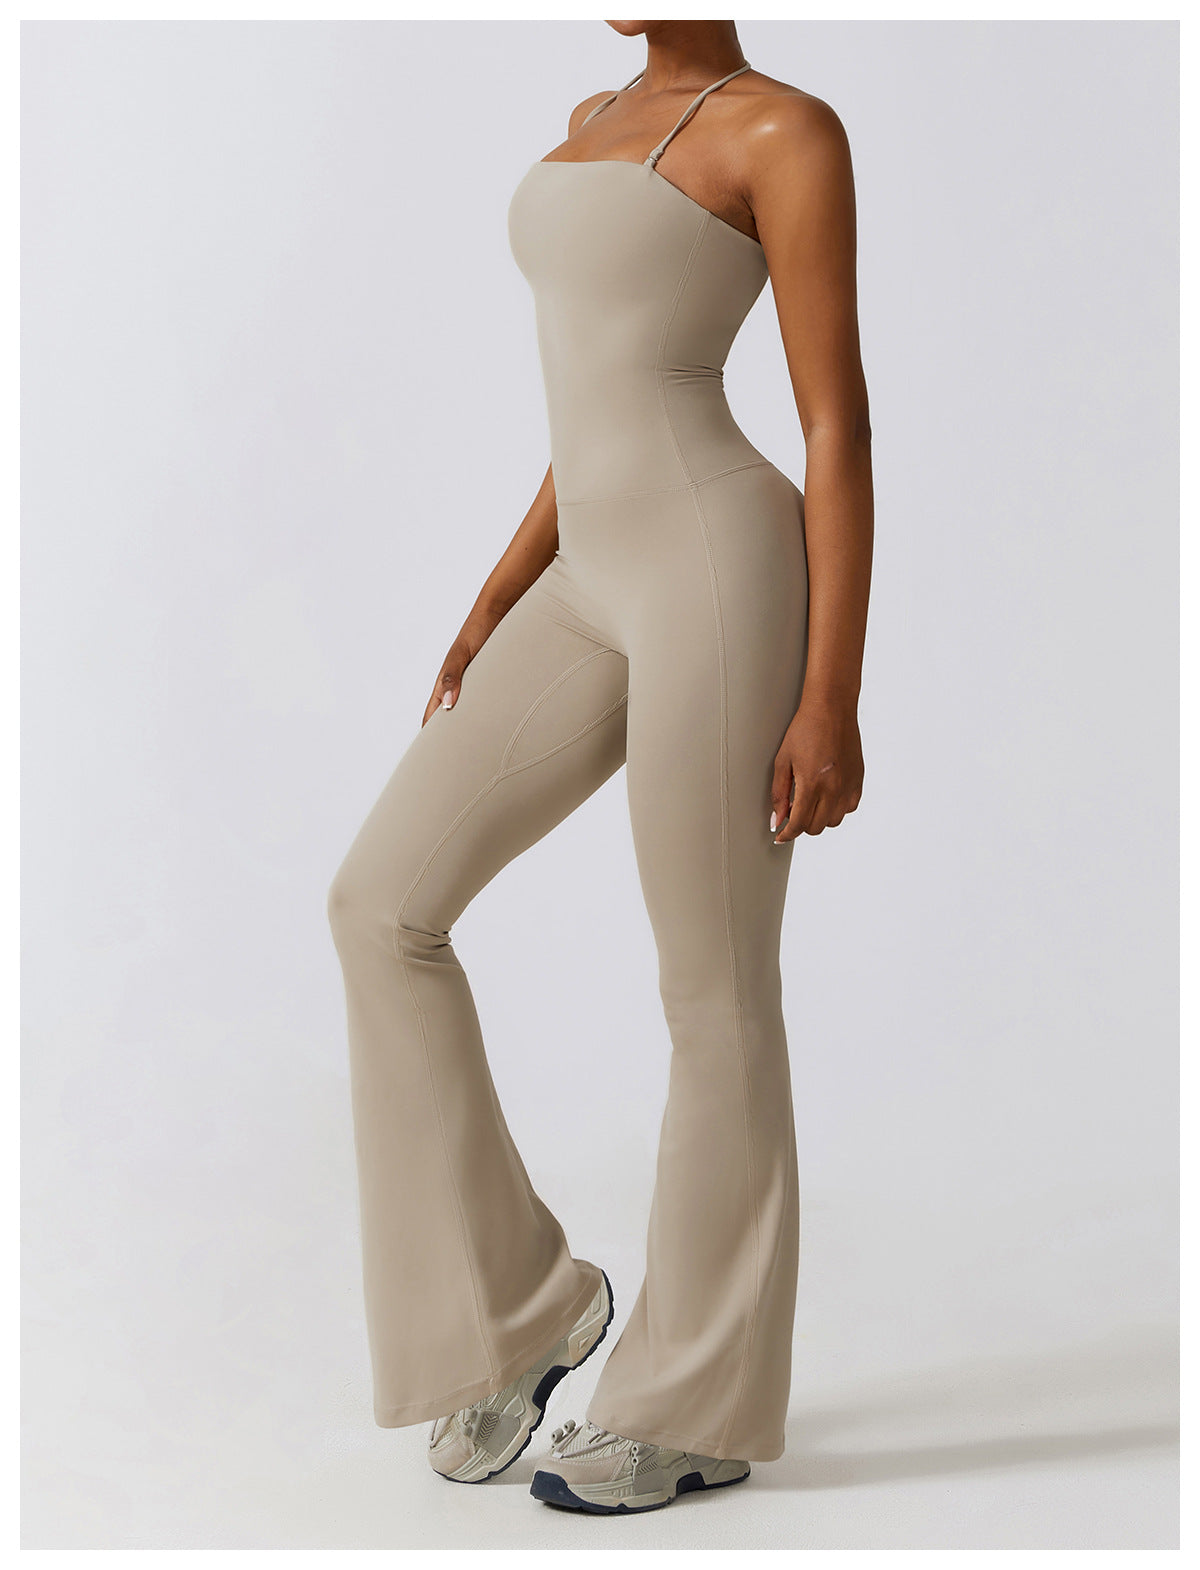 2023.09 Quick-drying tight bodysuit nude casual sports fitness suit dance micro La one-piece yoga suit 8393